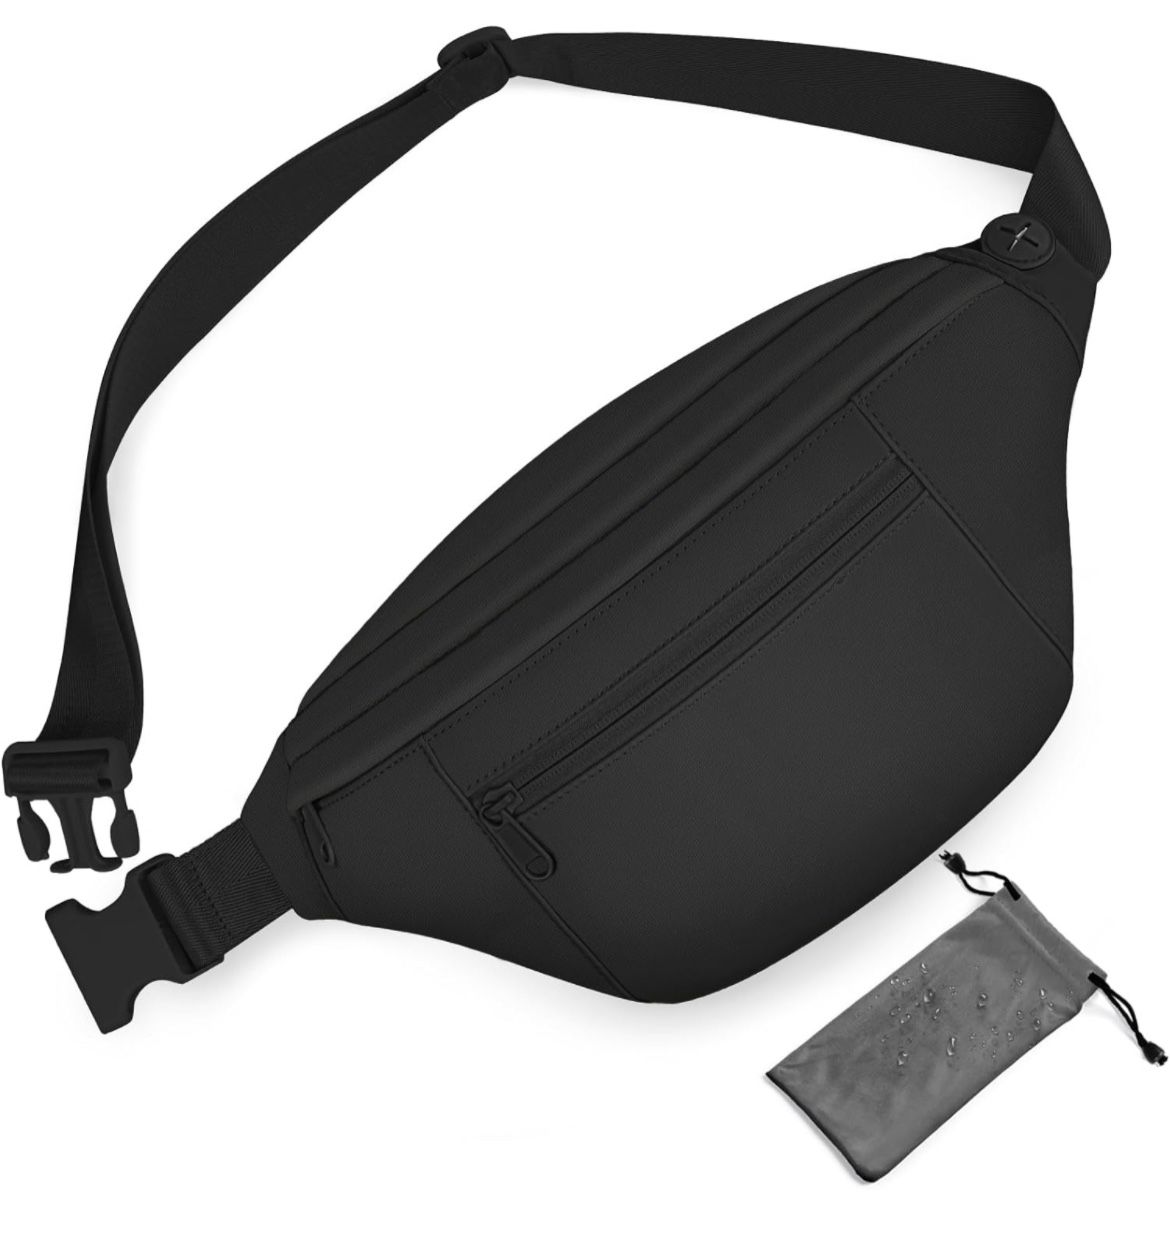 Crossbody Fanny Pack With 3 Zippers, 3 Pockets Fanny Pack For Women Gifts, Big Belt Bag For Sports Running, Anti Theft Waist Bag For Travel With Mini 